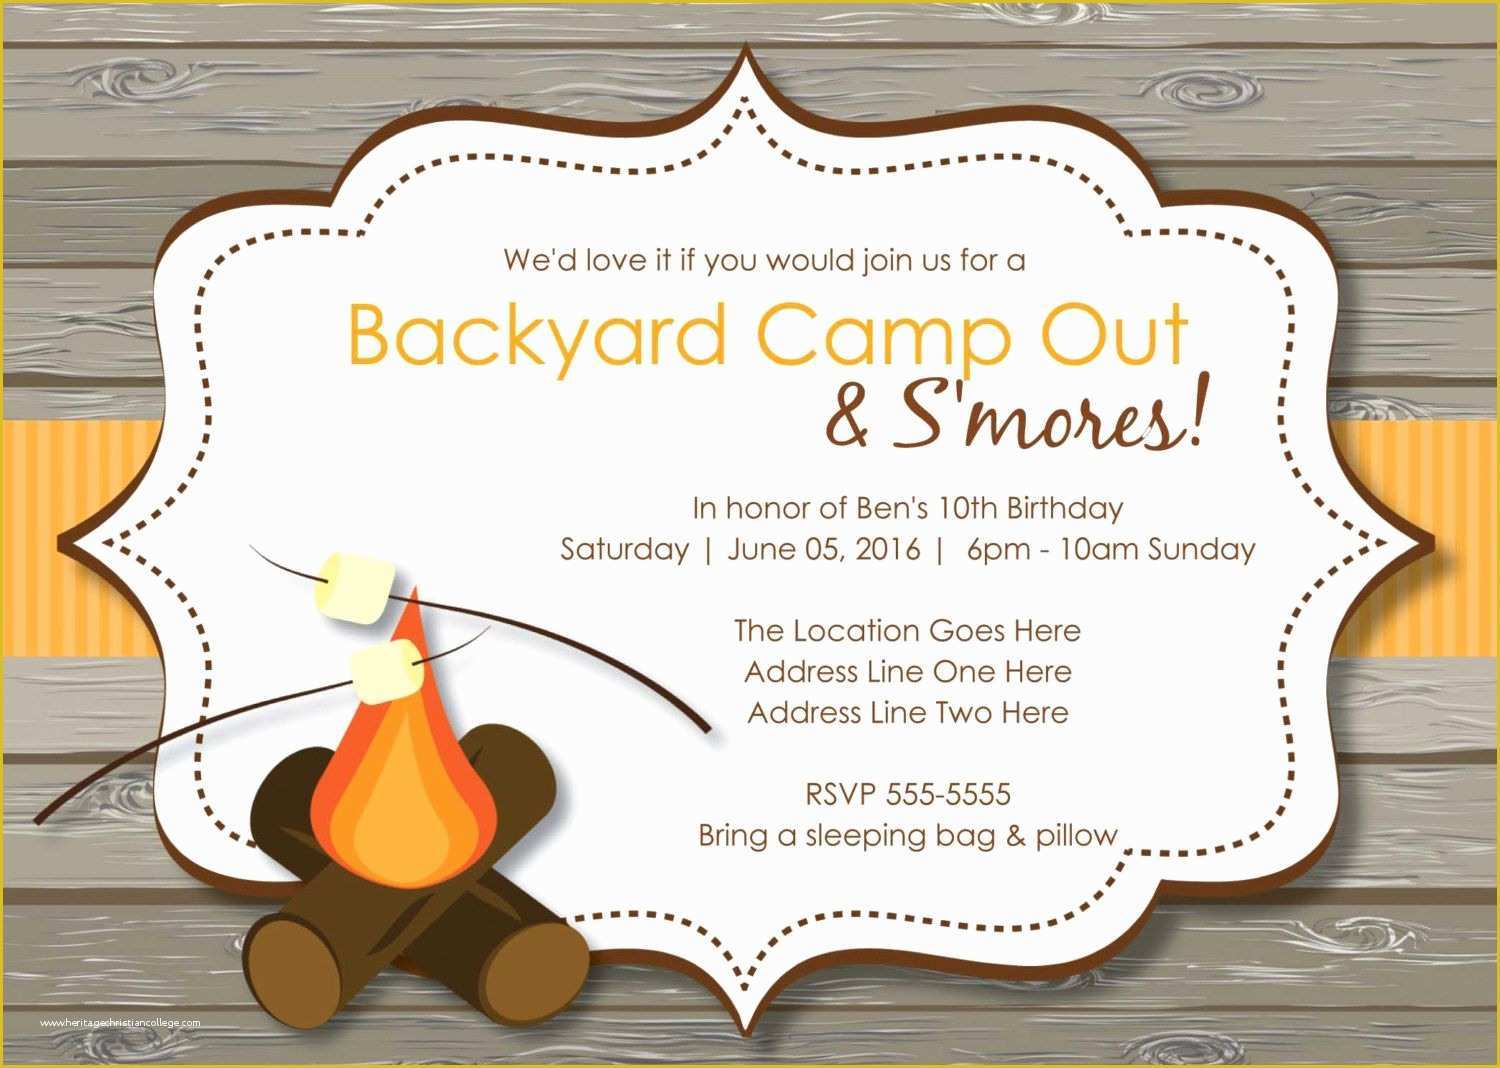 Camping Invitations Templates Free Of Rustic S Mores Camp Out Invitations